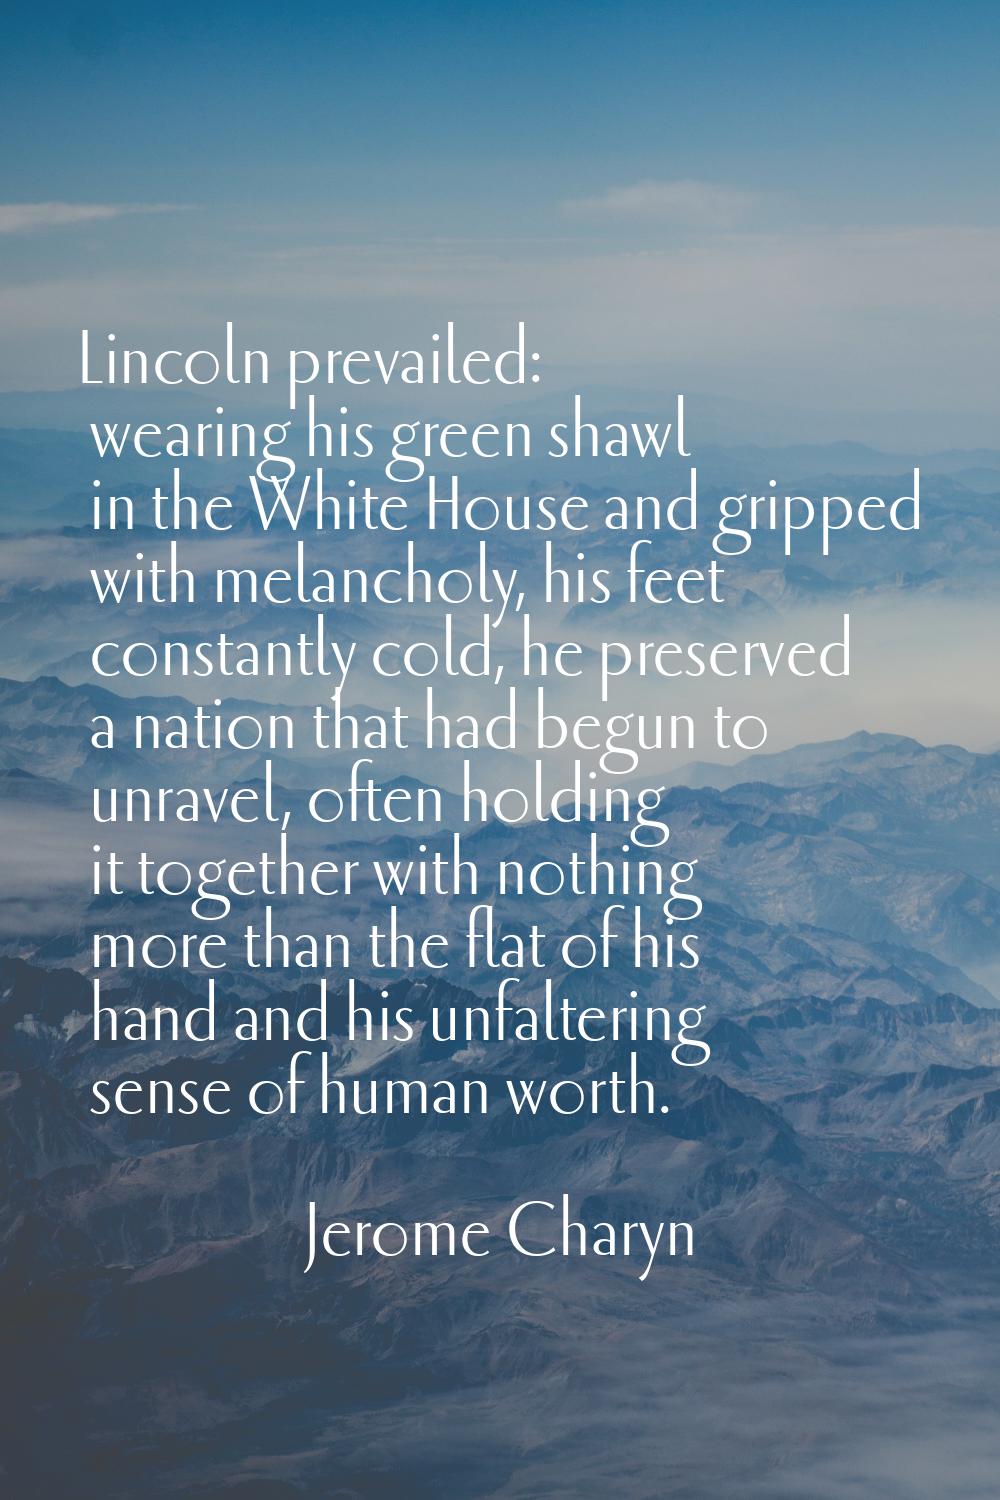 Lincoln prevailed: wearing his green shawl in the White House and gripped with melancholy, his feet